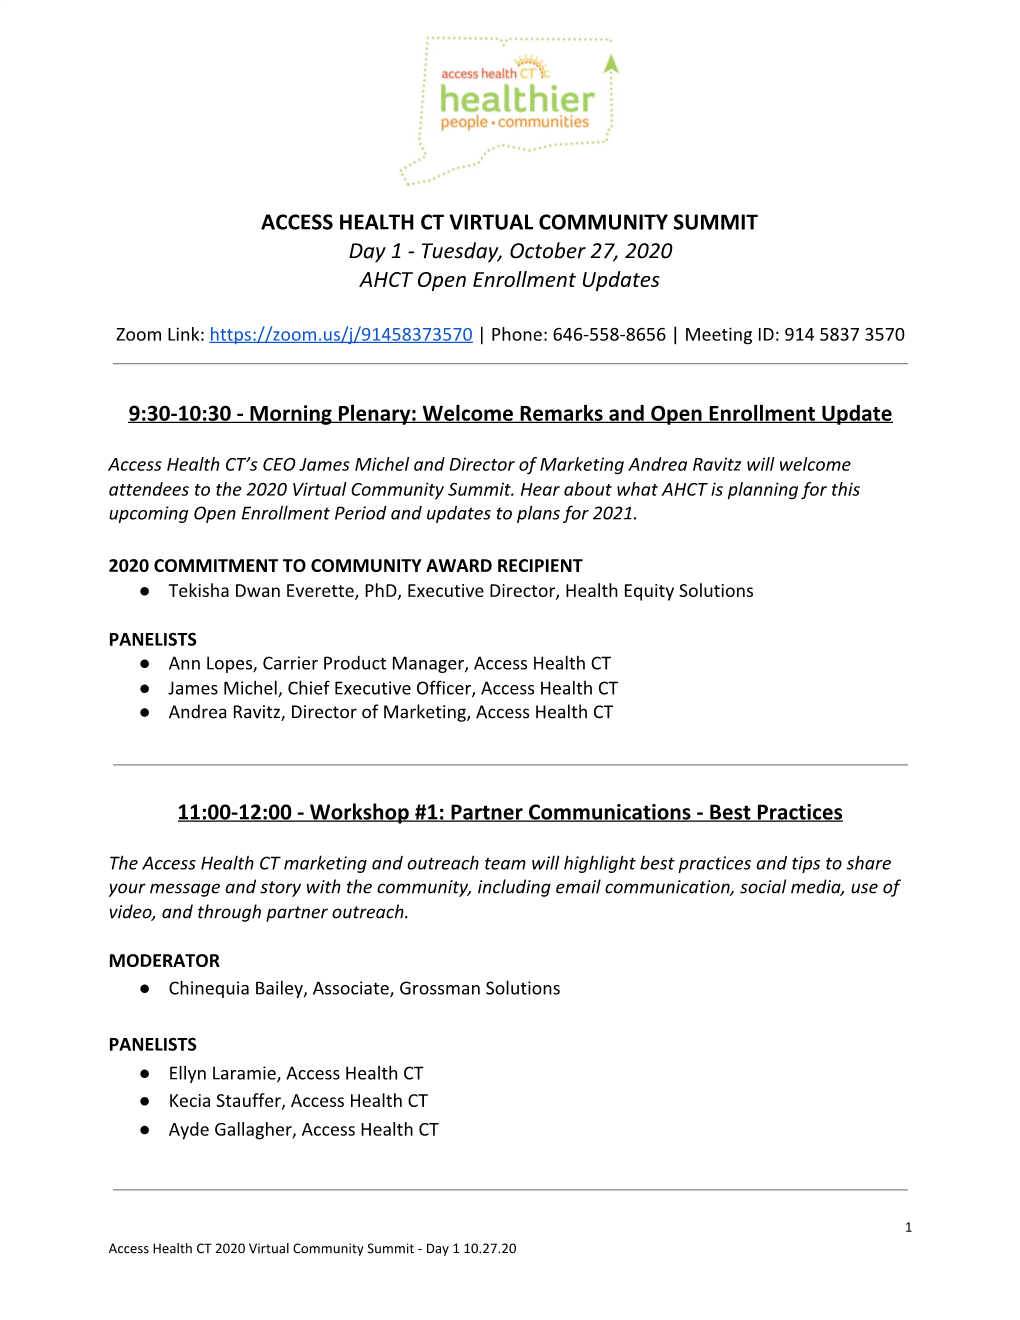 ACCESS HEALTH CT VIRTUAL COMMUNITY SUMMIT Day 1 - Tuesday, October 27, 2020 AHCT Open Enrollment Updates